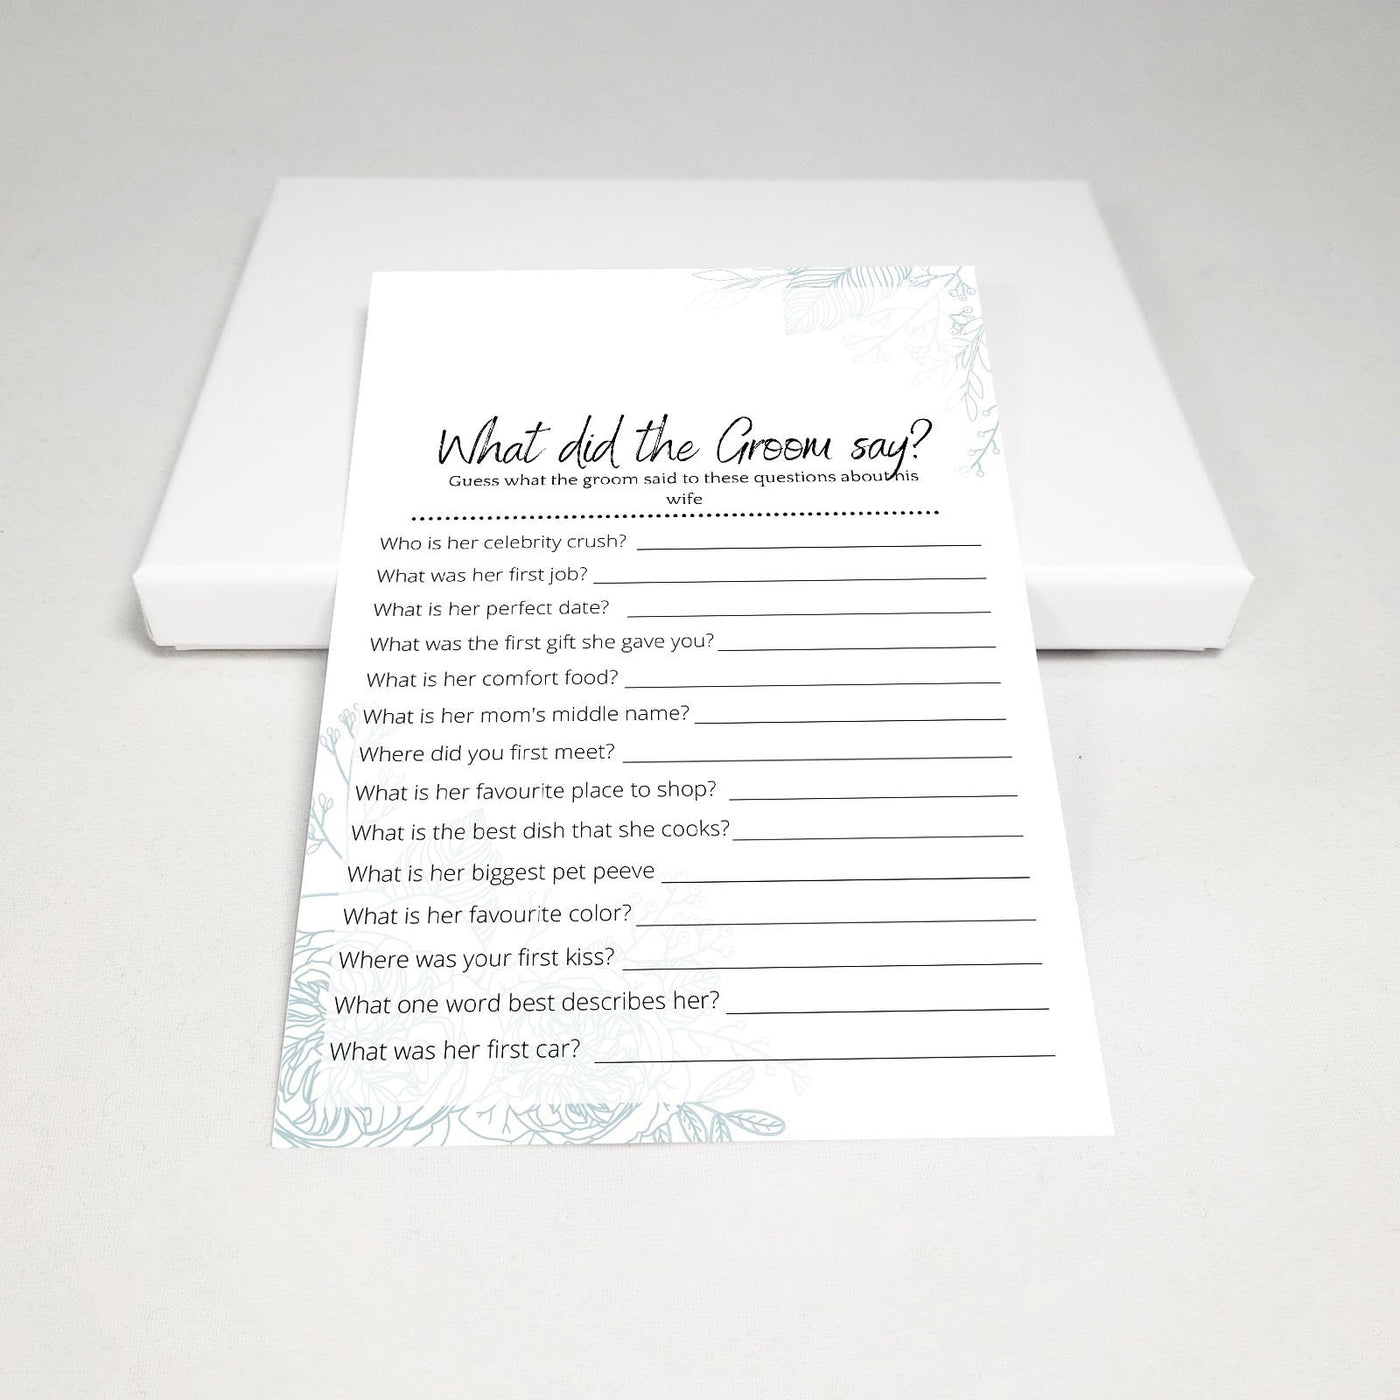 Minimal Flowers - What Did The Groom Say? | Bridal Shower Game Party Games Your Party Games 